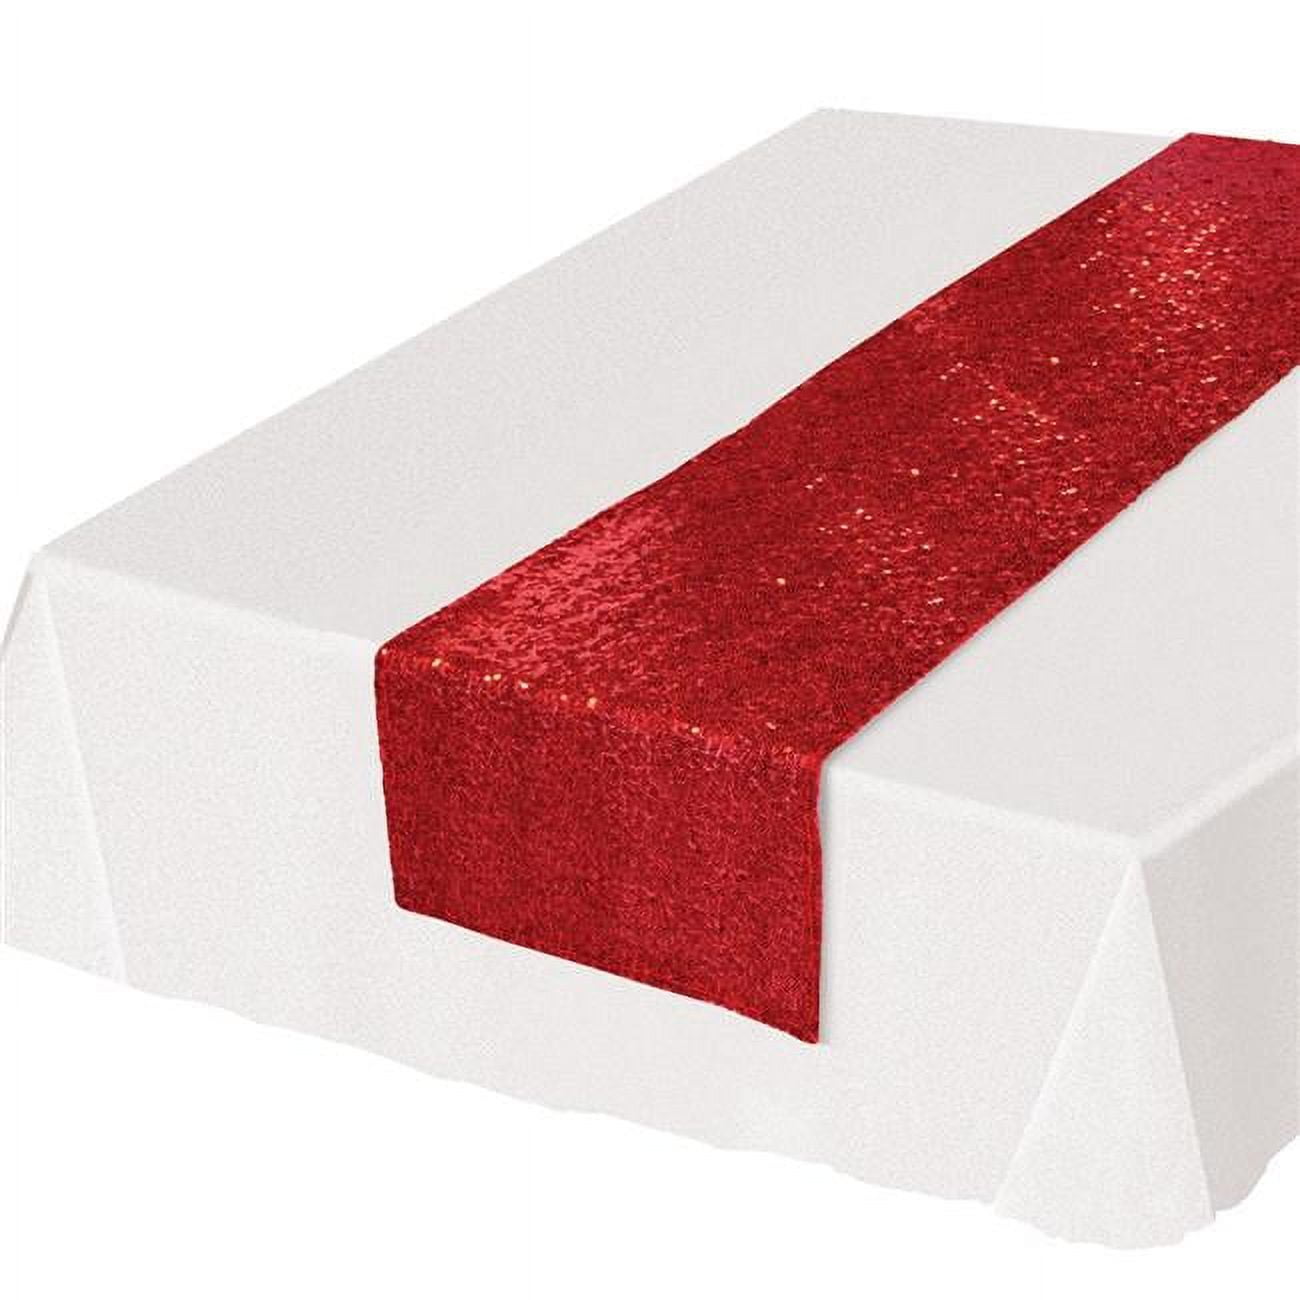 Picture of Beistle 54111-R Sequined Table Runner, Red